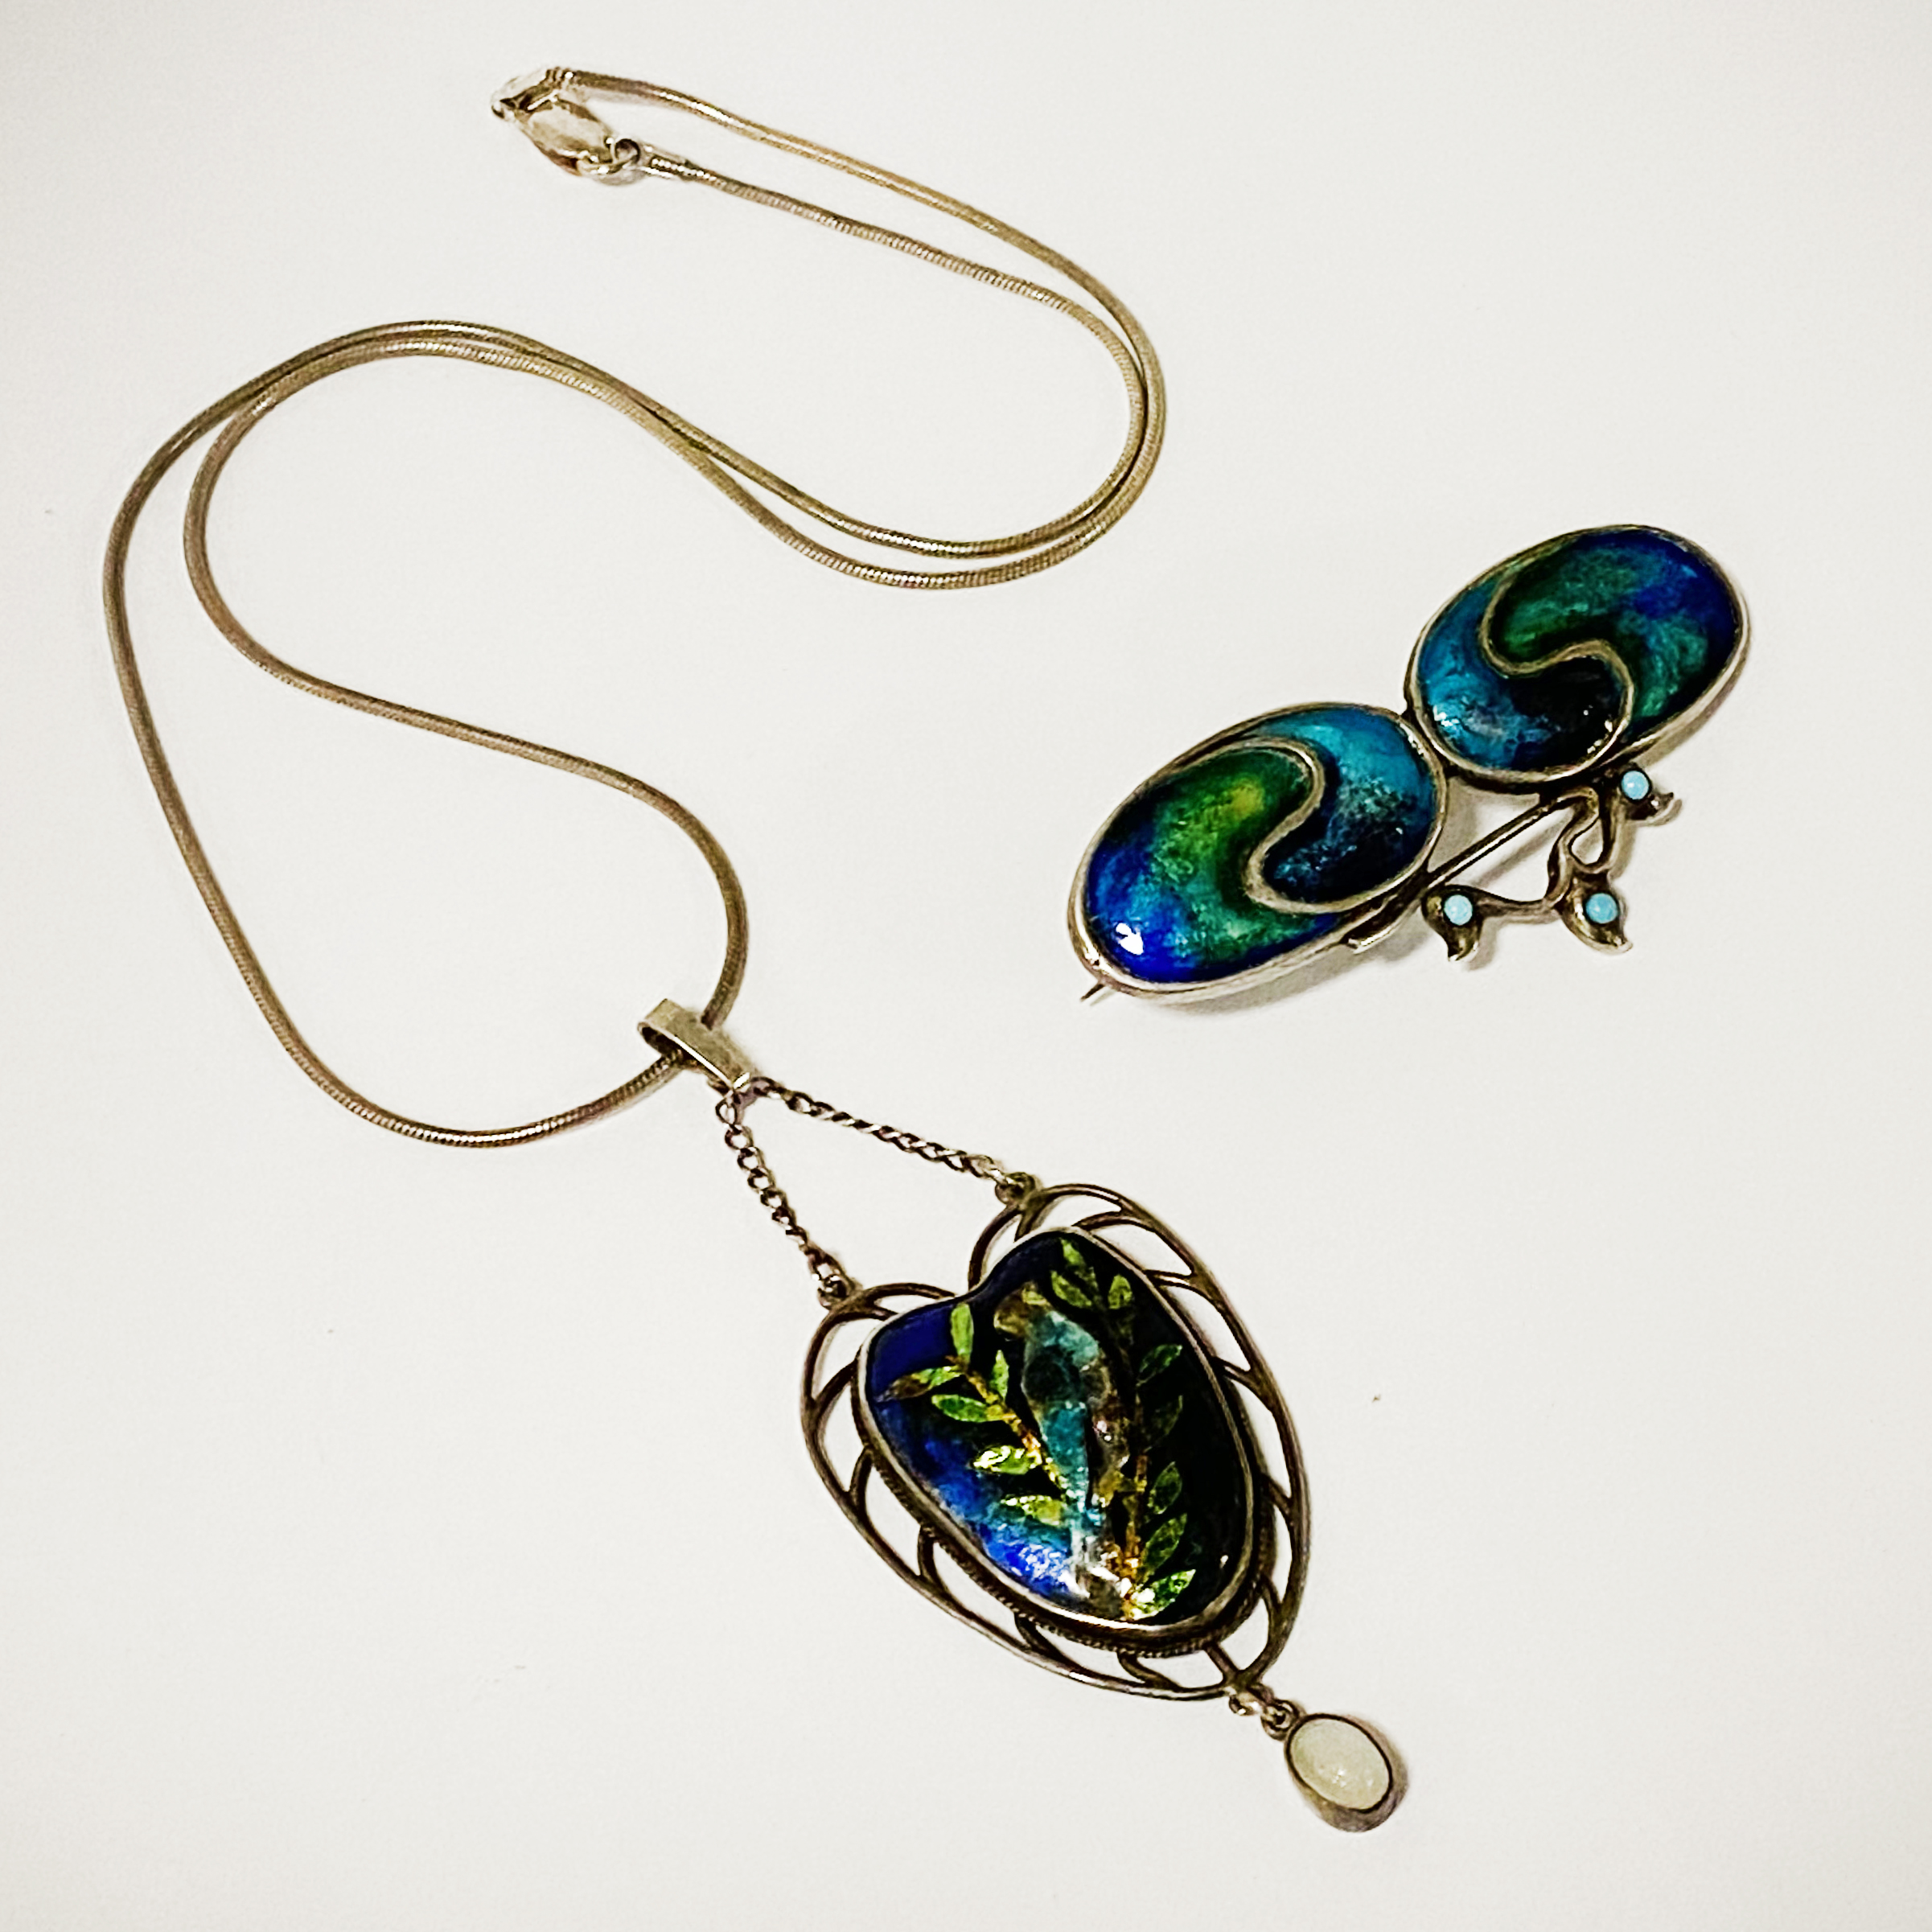 ARTS & CRAFTS LIBERTY STYLE SILVER & ENAMEL BROOCH WITH SILVER PENDANT & CHAIN